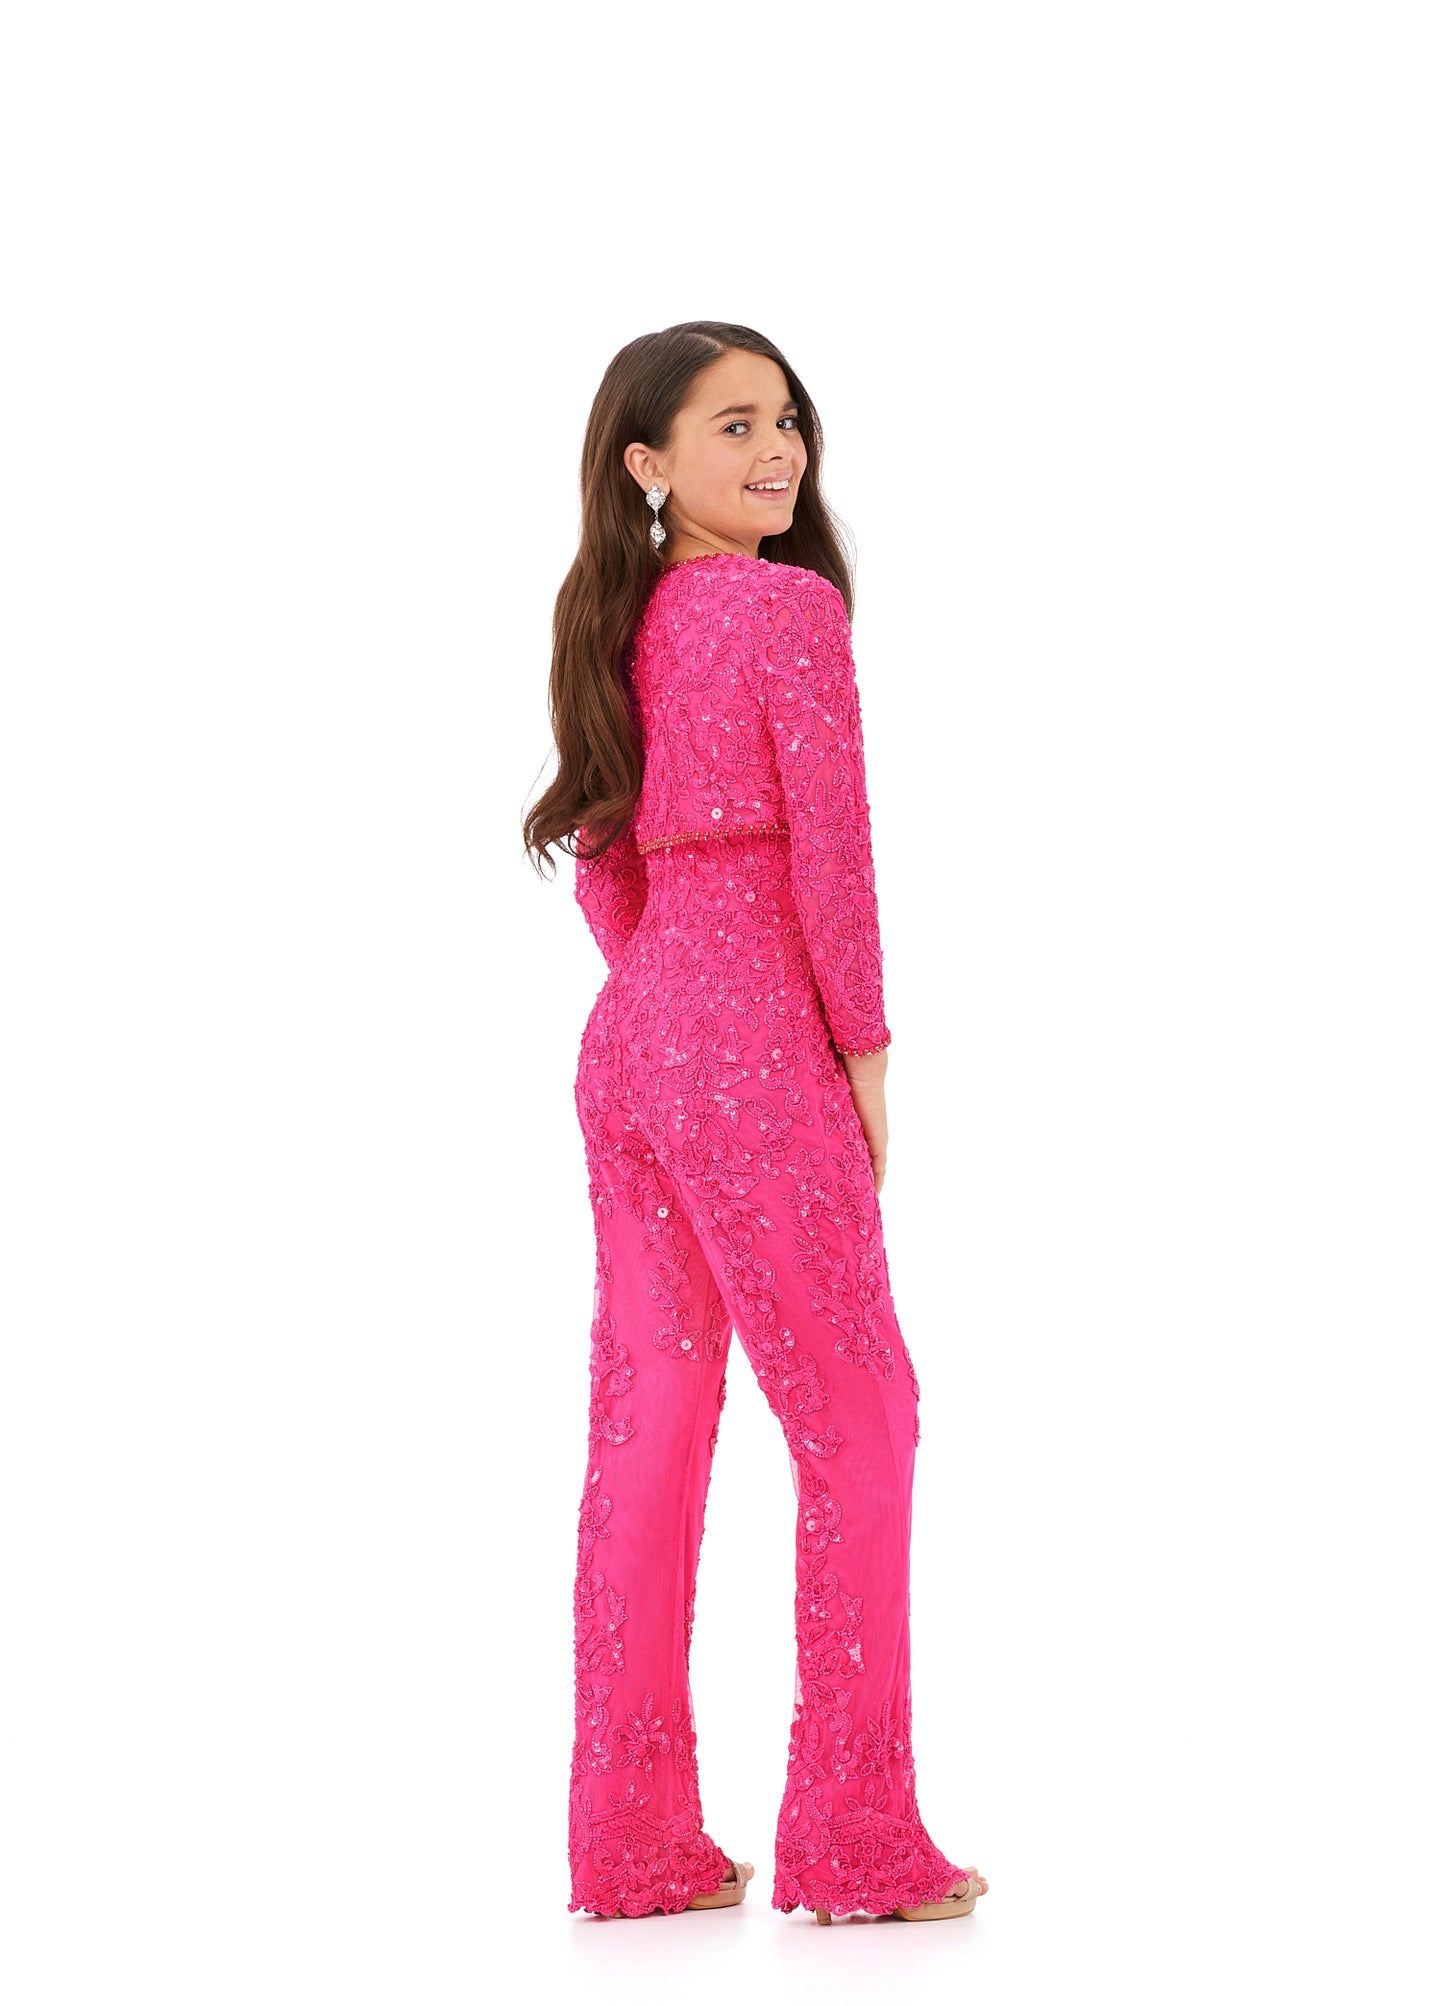 Dazzle the judges in Ashley Lauren Kids 8232 Girls Beaded Pageant Jumpsuit. This two-piece set includes a fully beaded jumpsuit and an accompanying long-sleeve blazer jacket, complete with sequin accents. With this ensemble, your little one will look and feel like a star.  Sizes: 4-16  Colors: Coral, Hot Pink, Jade